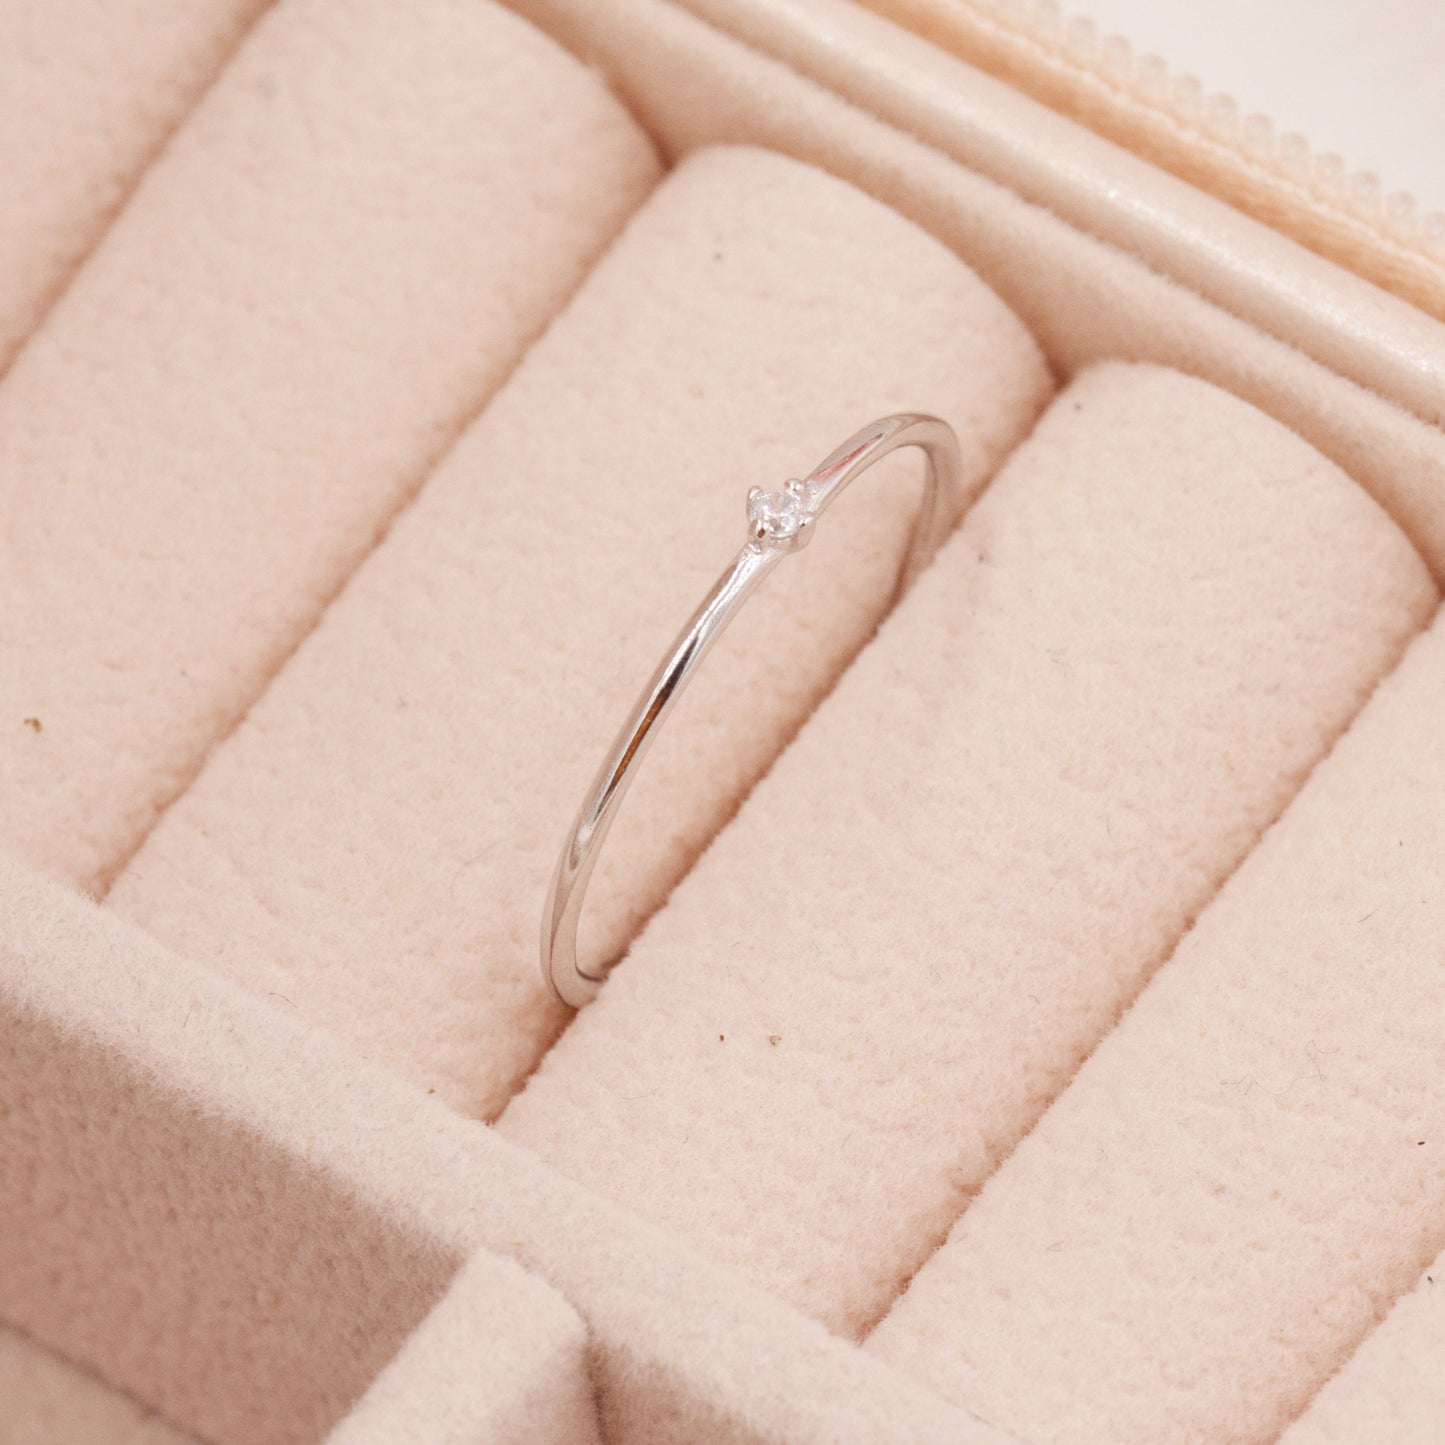 Extra Fine Single CZ Ring in Sterling Silver, Extra Skinny Stacking Rings,  US 4 5 6 7 Sized Delicate Rings,